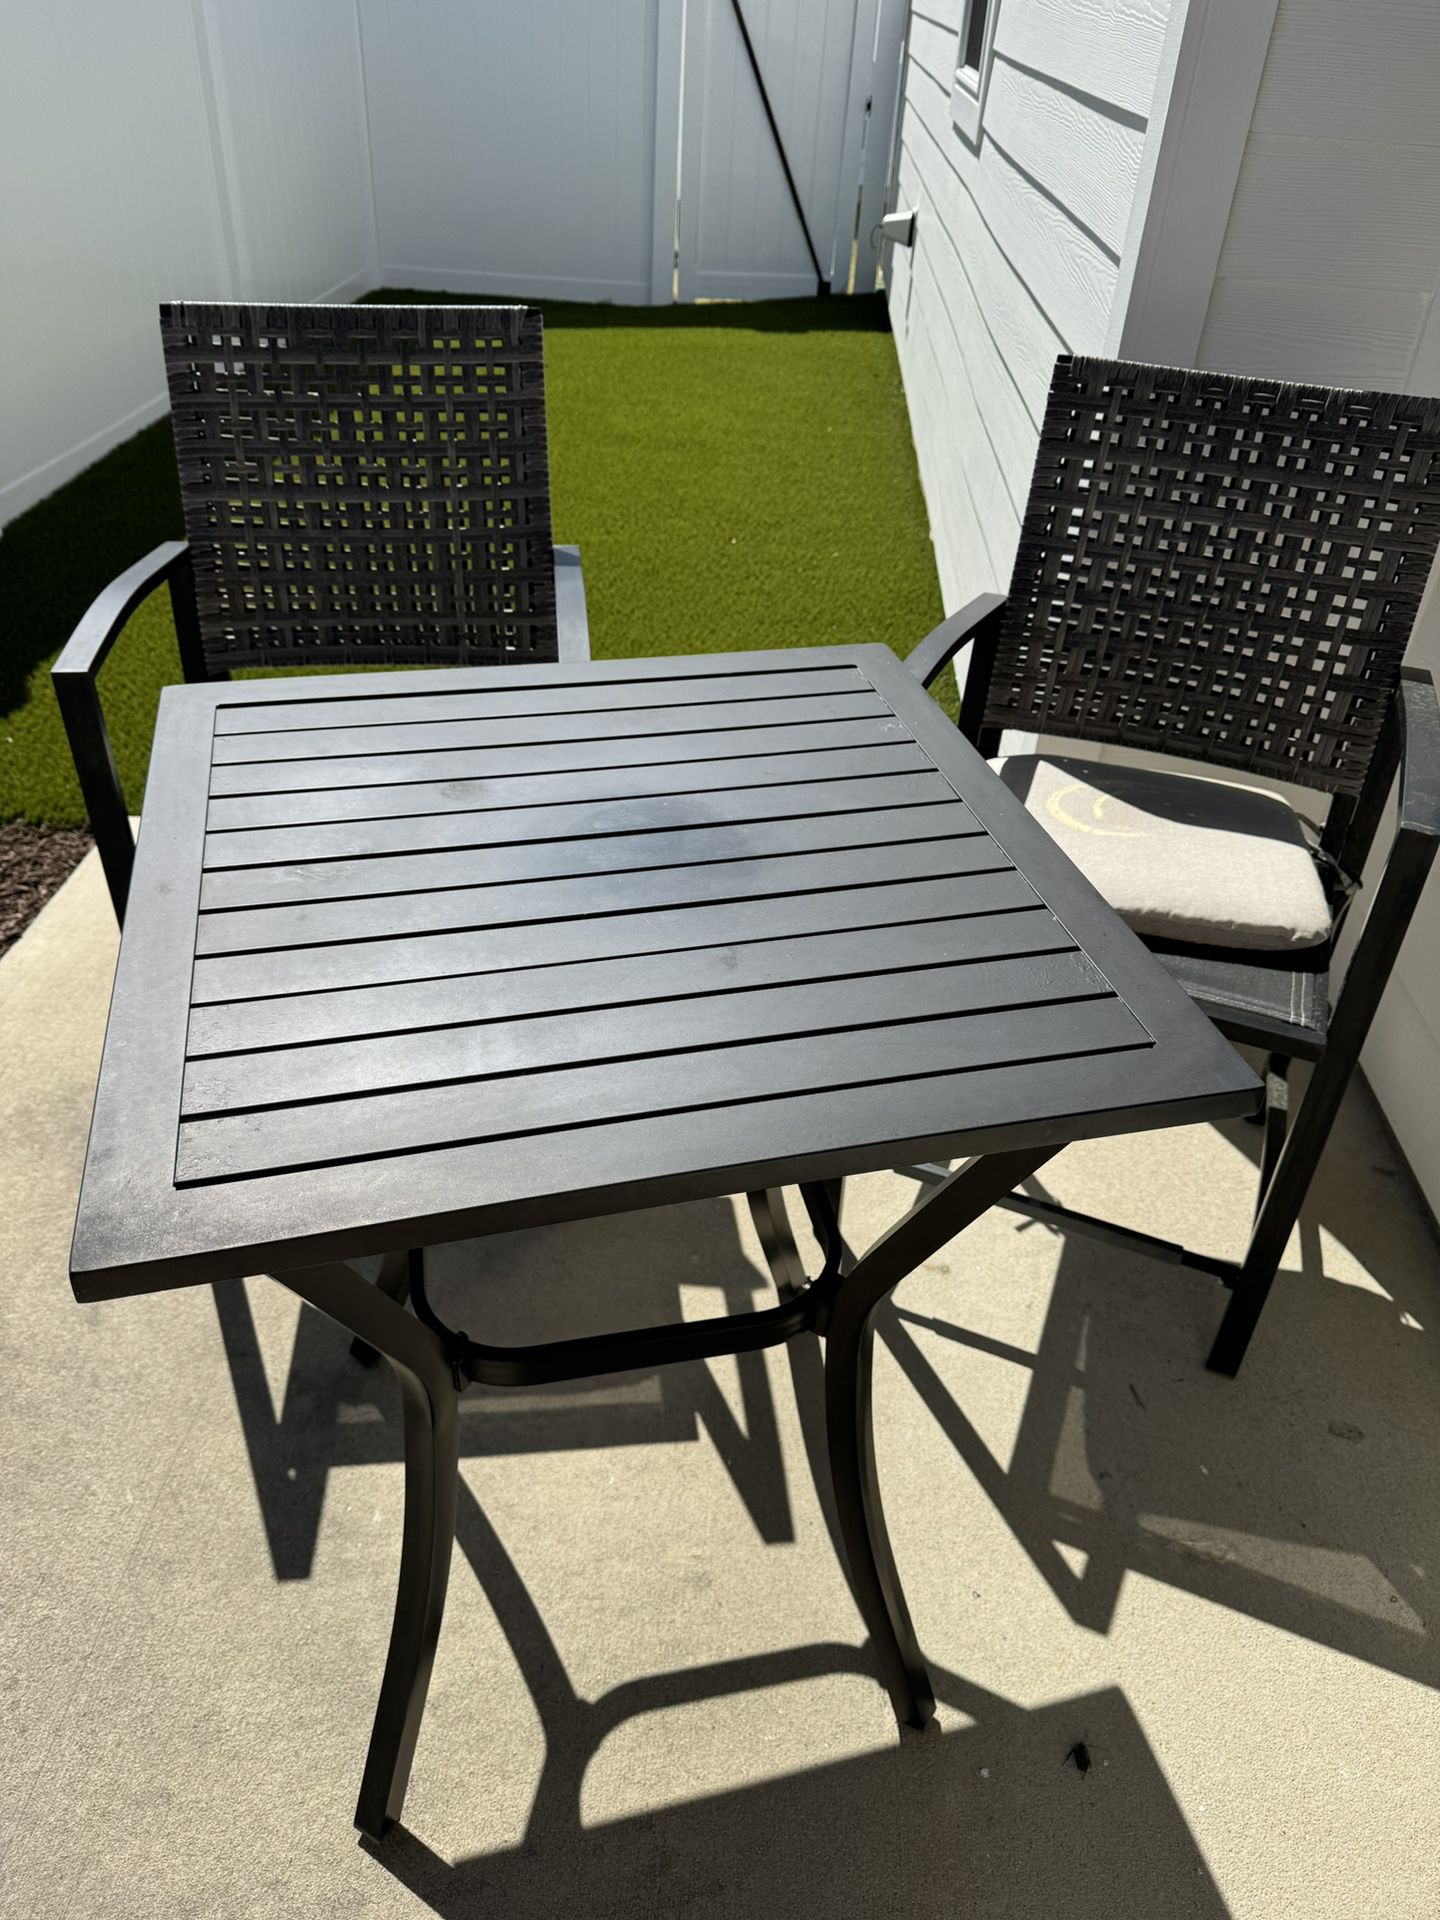 Patio Furniture Table & chairs 